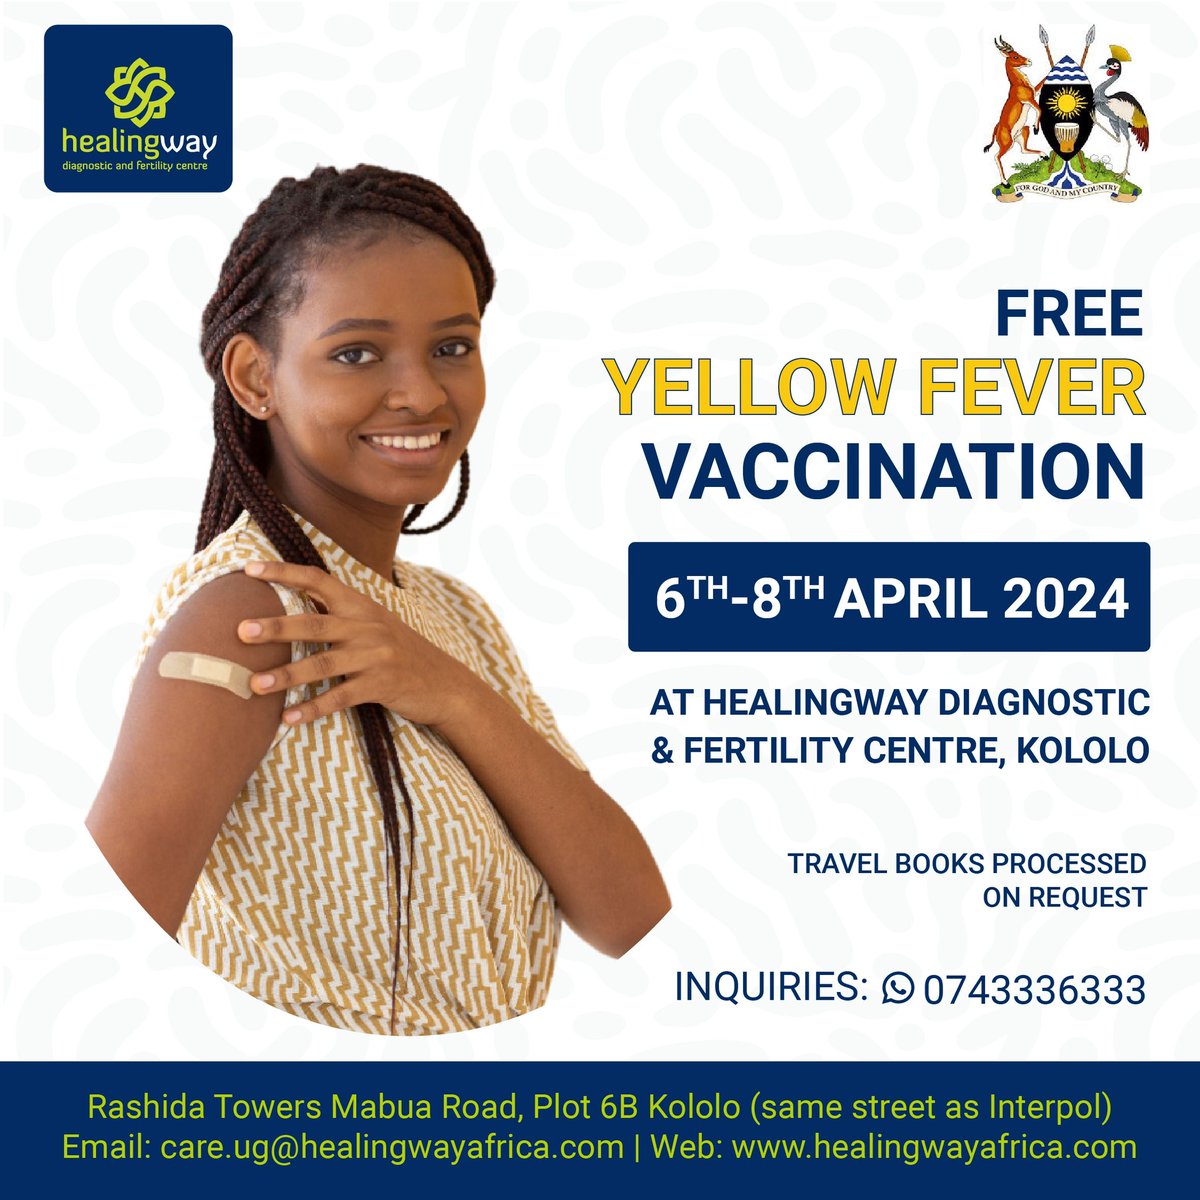 Hello guys.
Starting tomorrow there will be free yellow fever vaccination at Healingway till 8th April. Your health matters let’s do this !!

We are located at Rashida Towers.